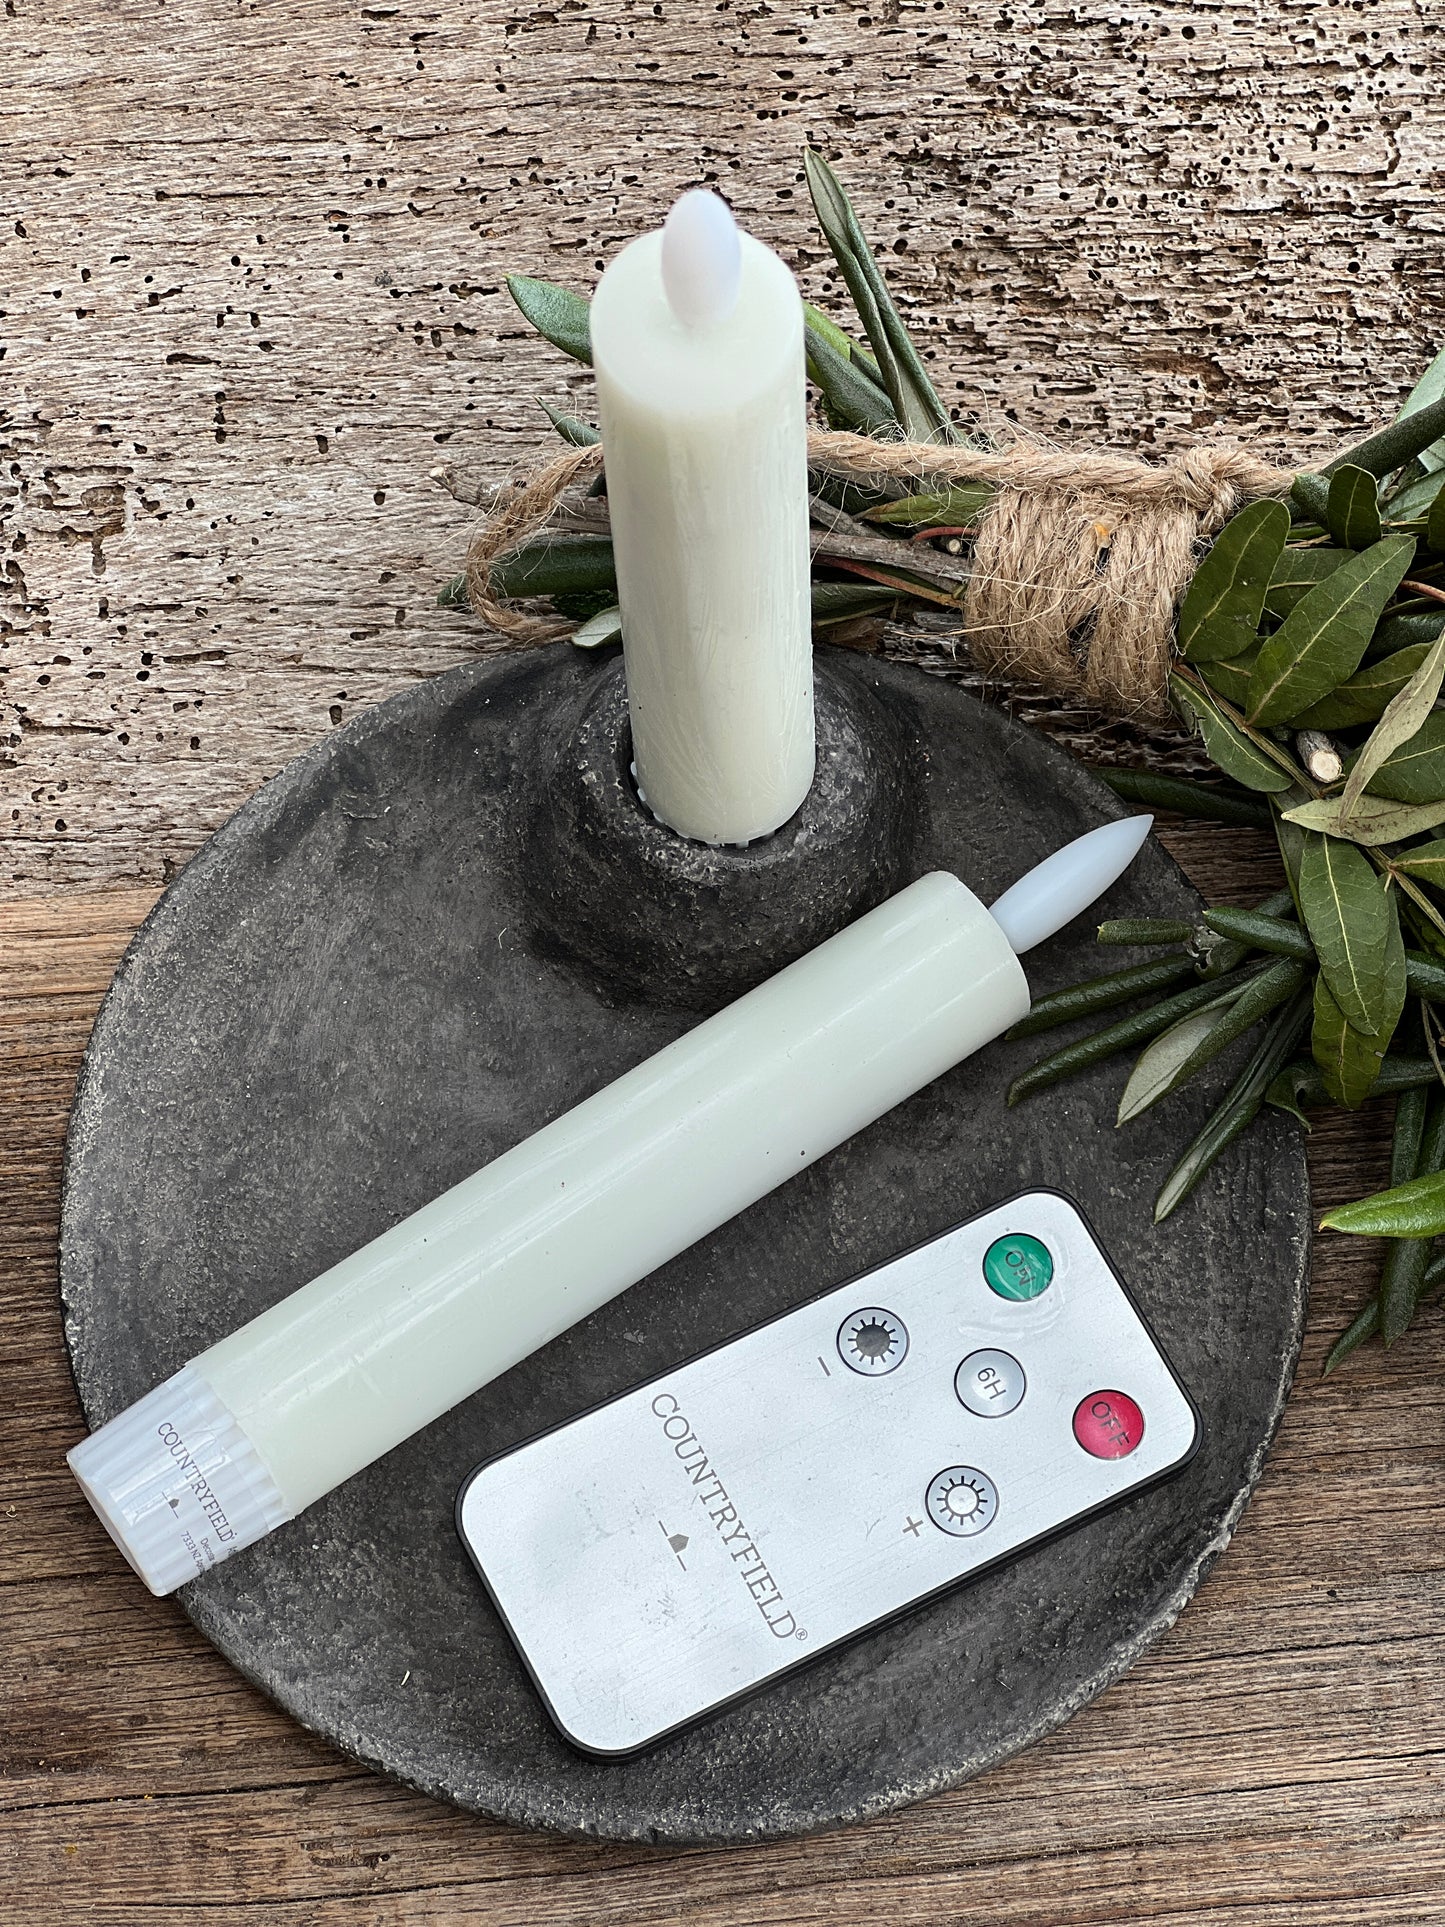 Dinner candle LED 15 cm Off White Countryfield. Set of 2 pieces incl. remote control